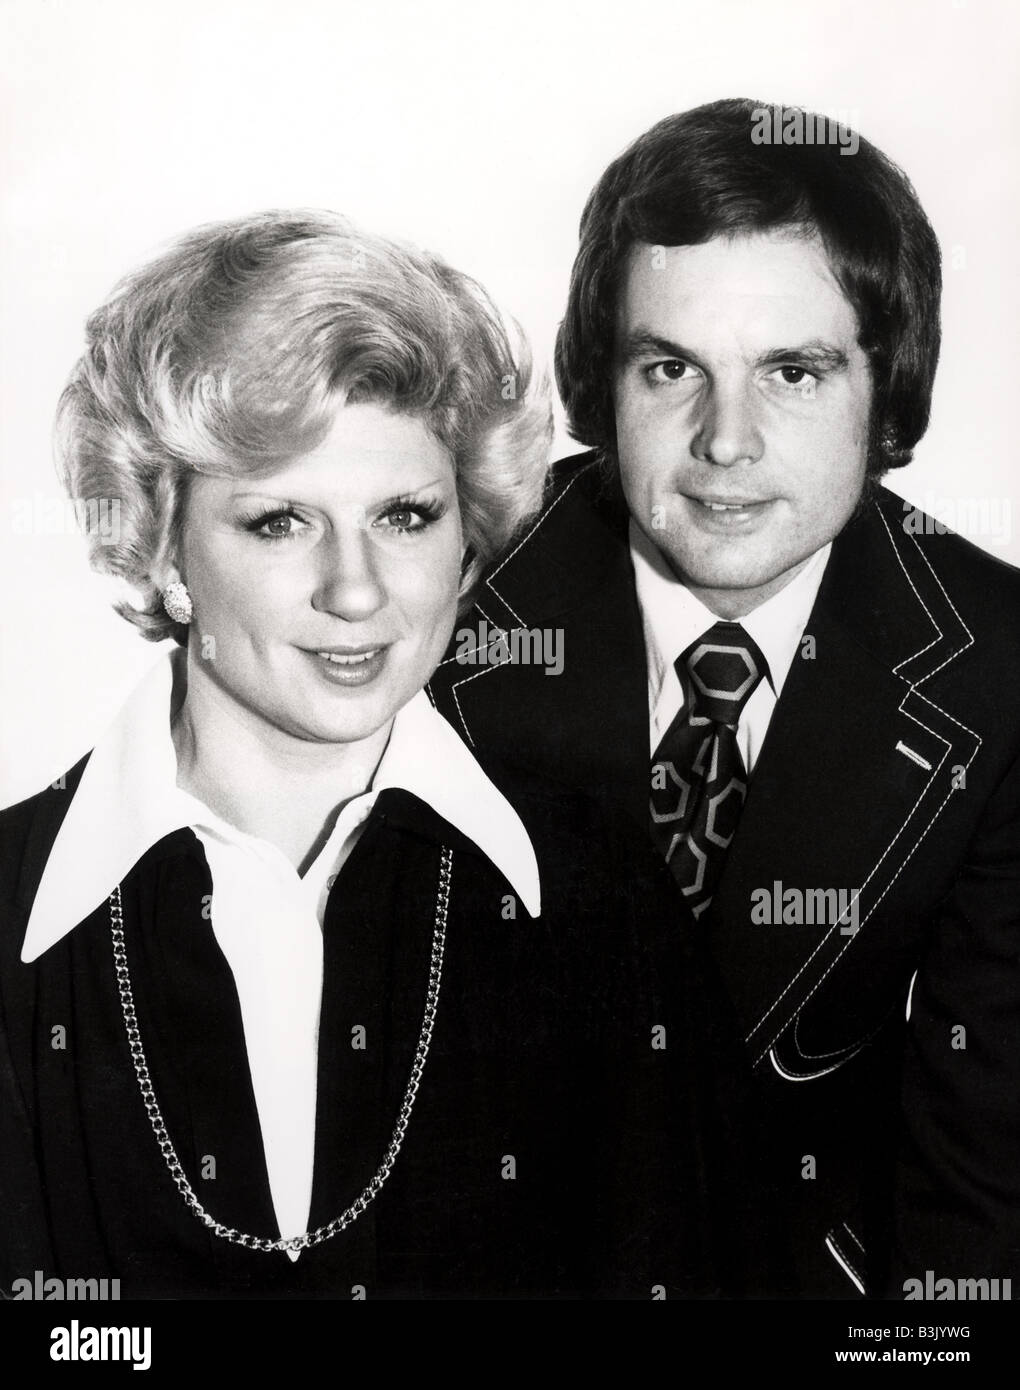 JACKIE TRENT and TONY HATCH  UK pop singers about 1963 Stock Photo